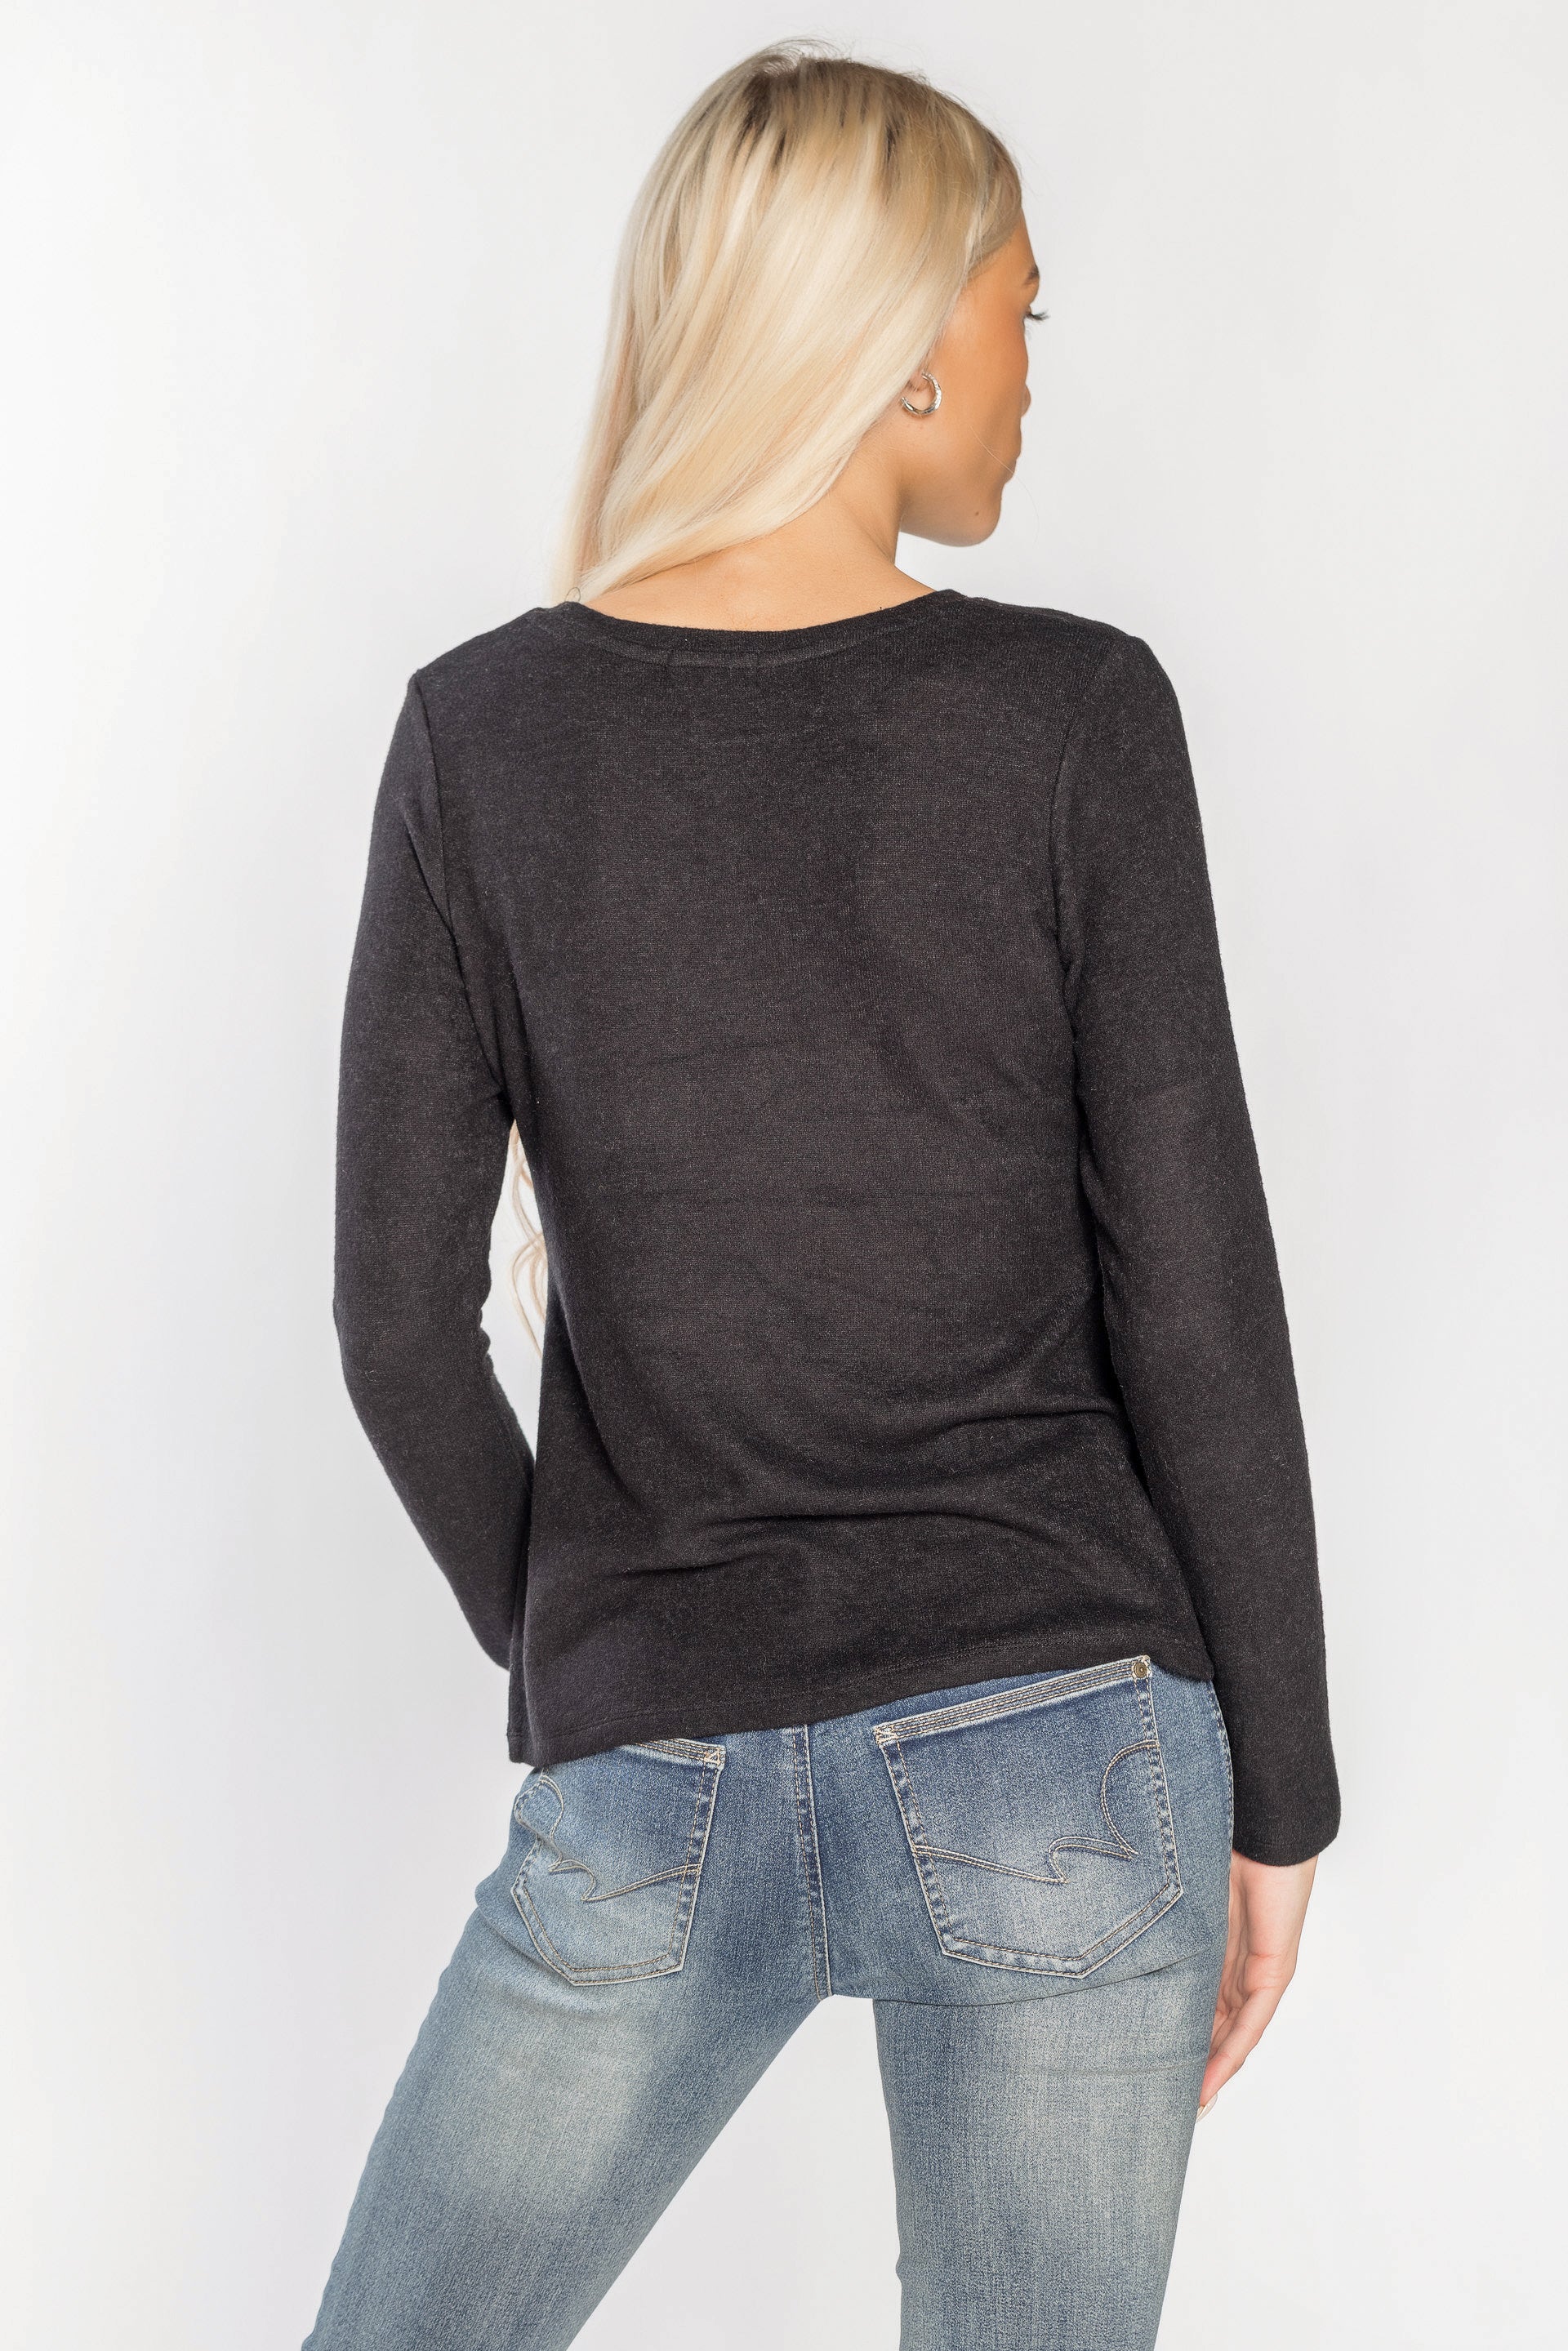 SuperSoft Long Sleeve Sweater